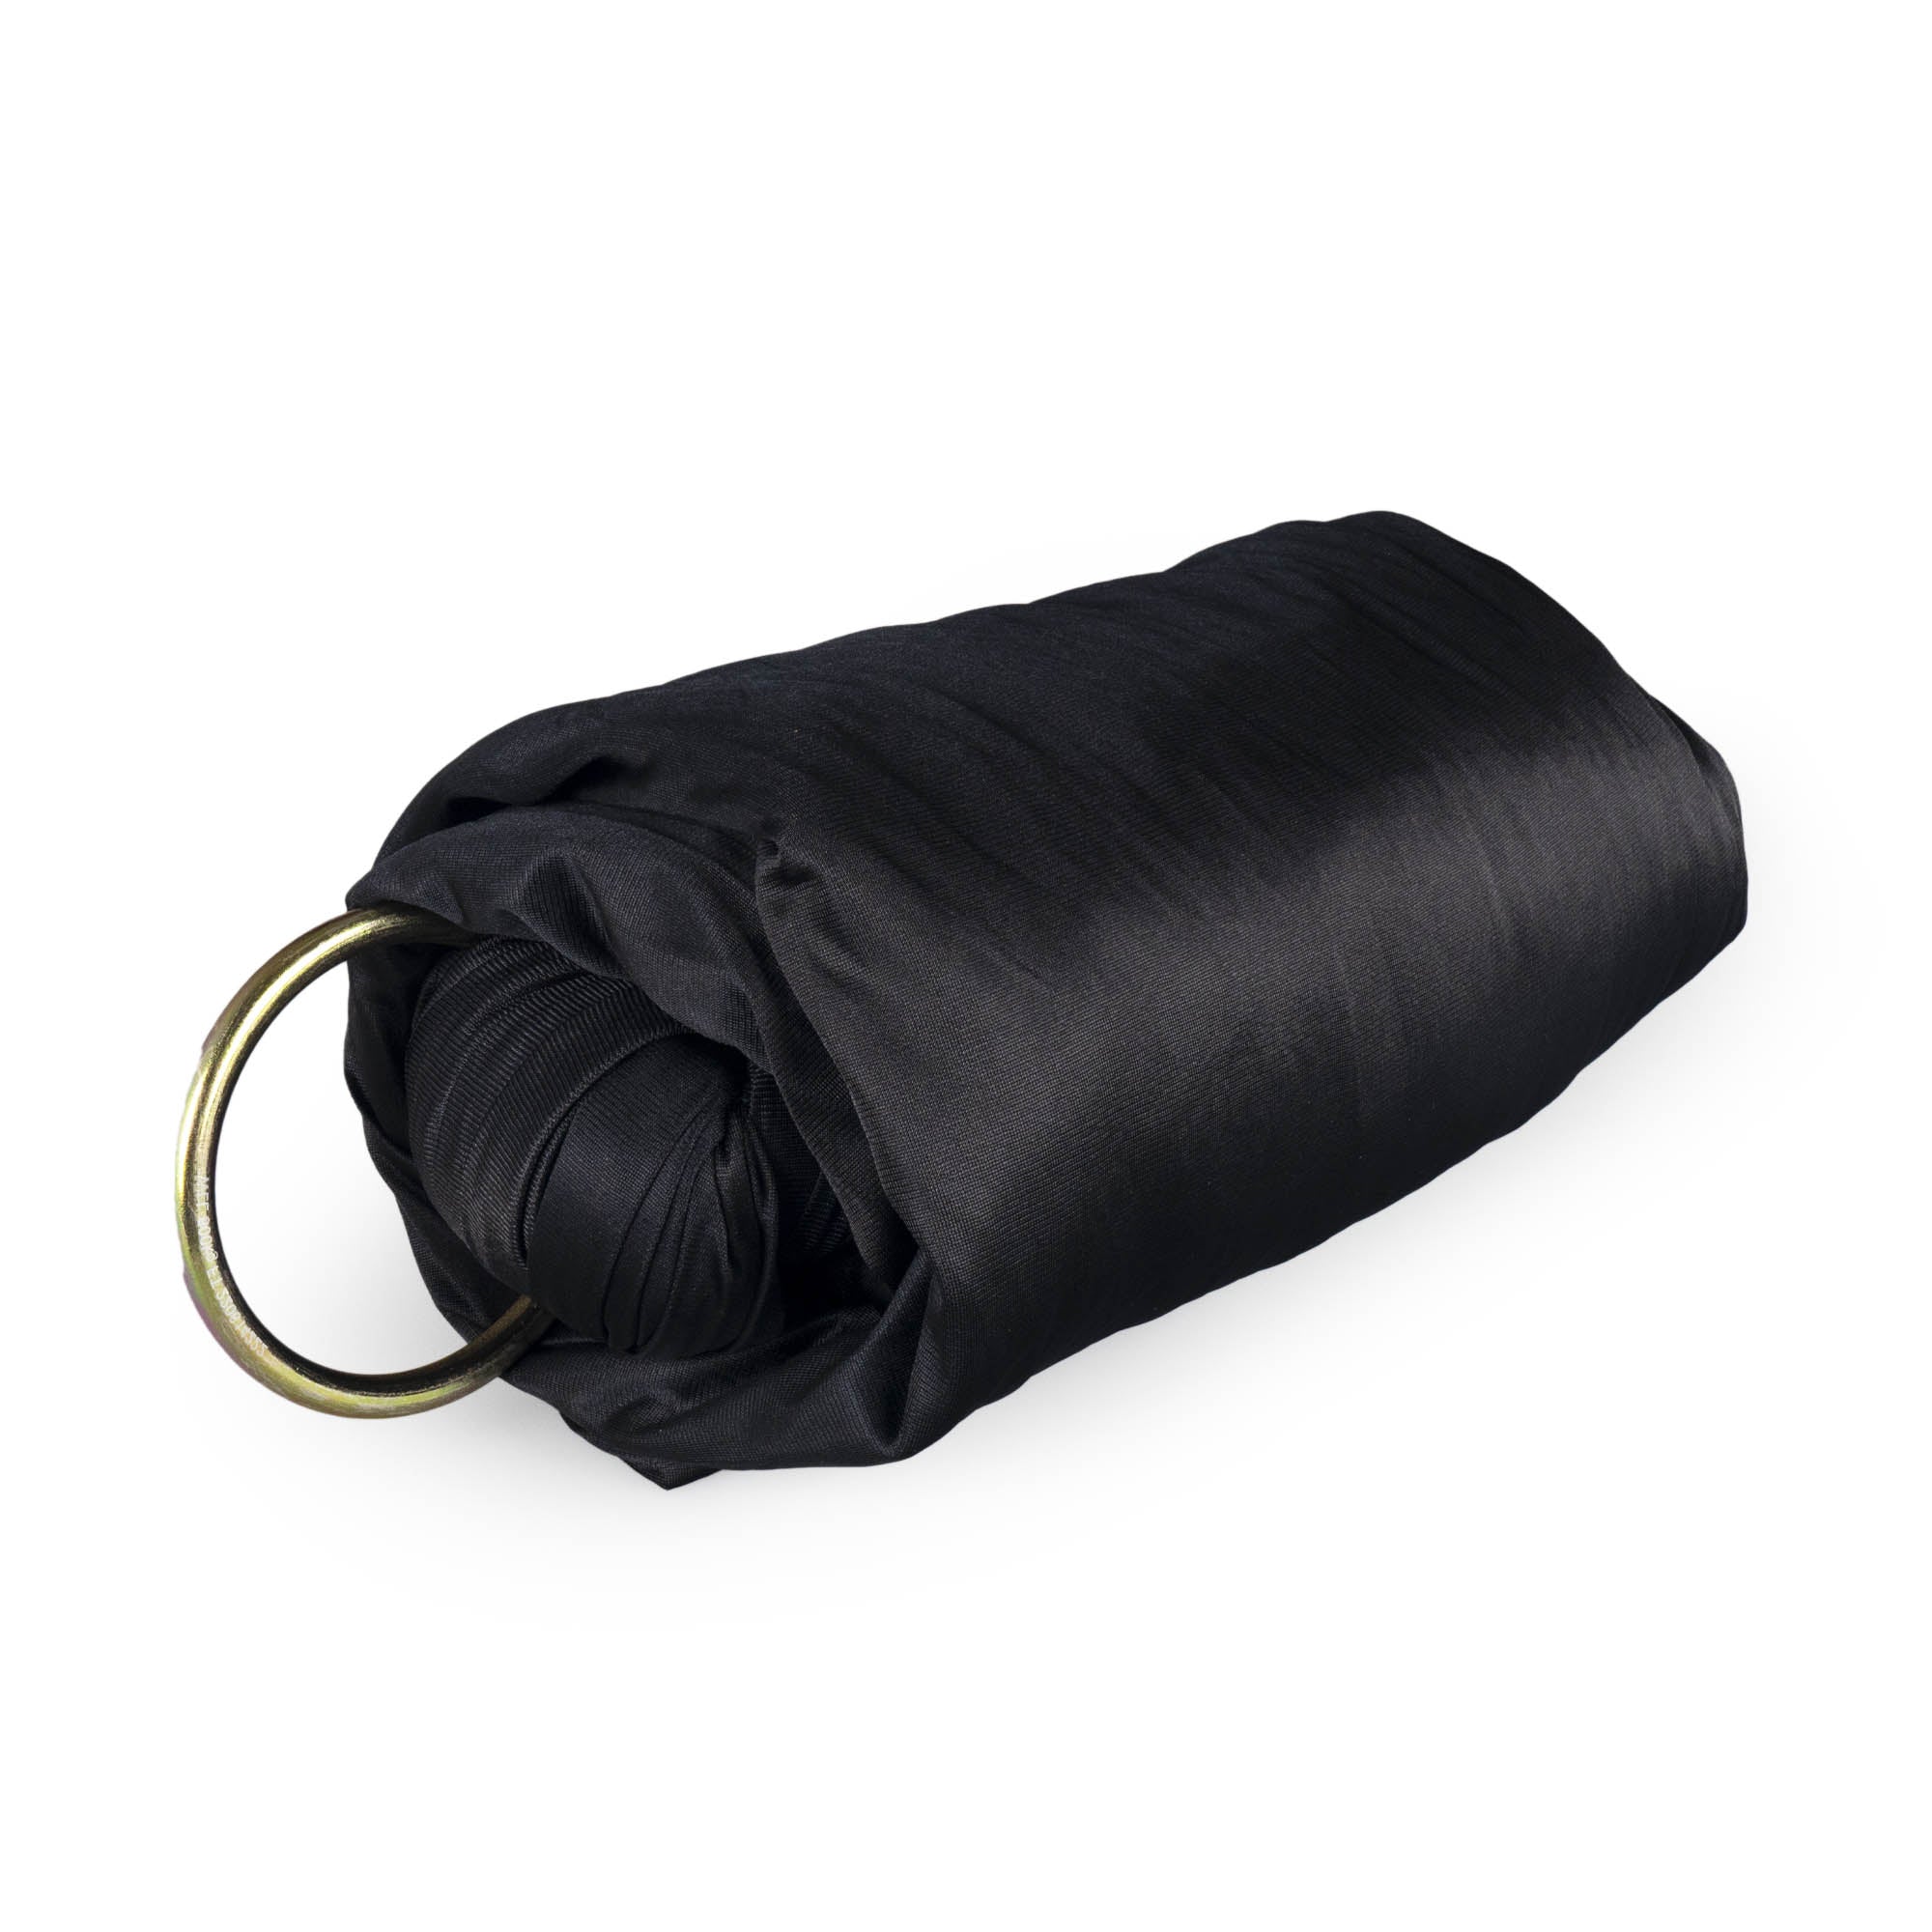 Black yoga hammock with O rings attached